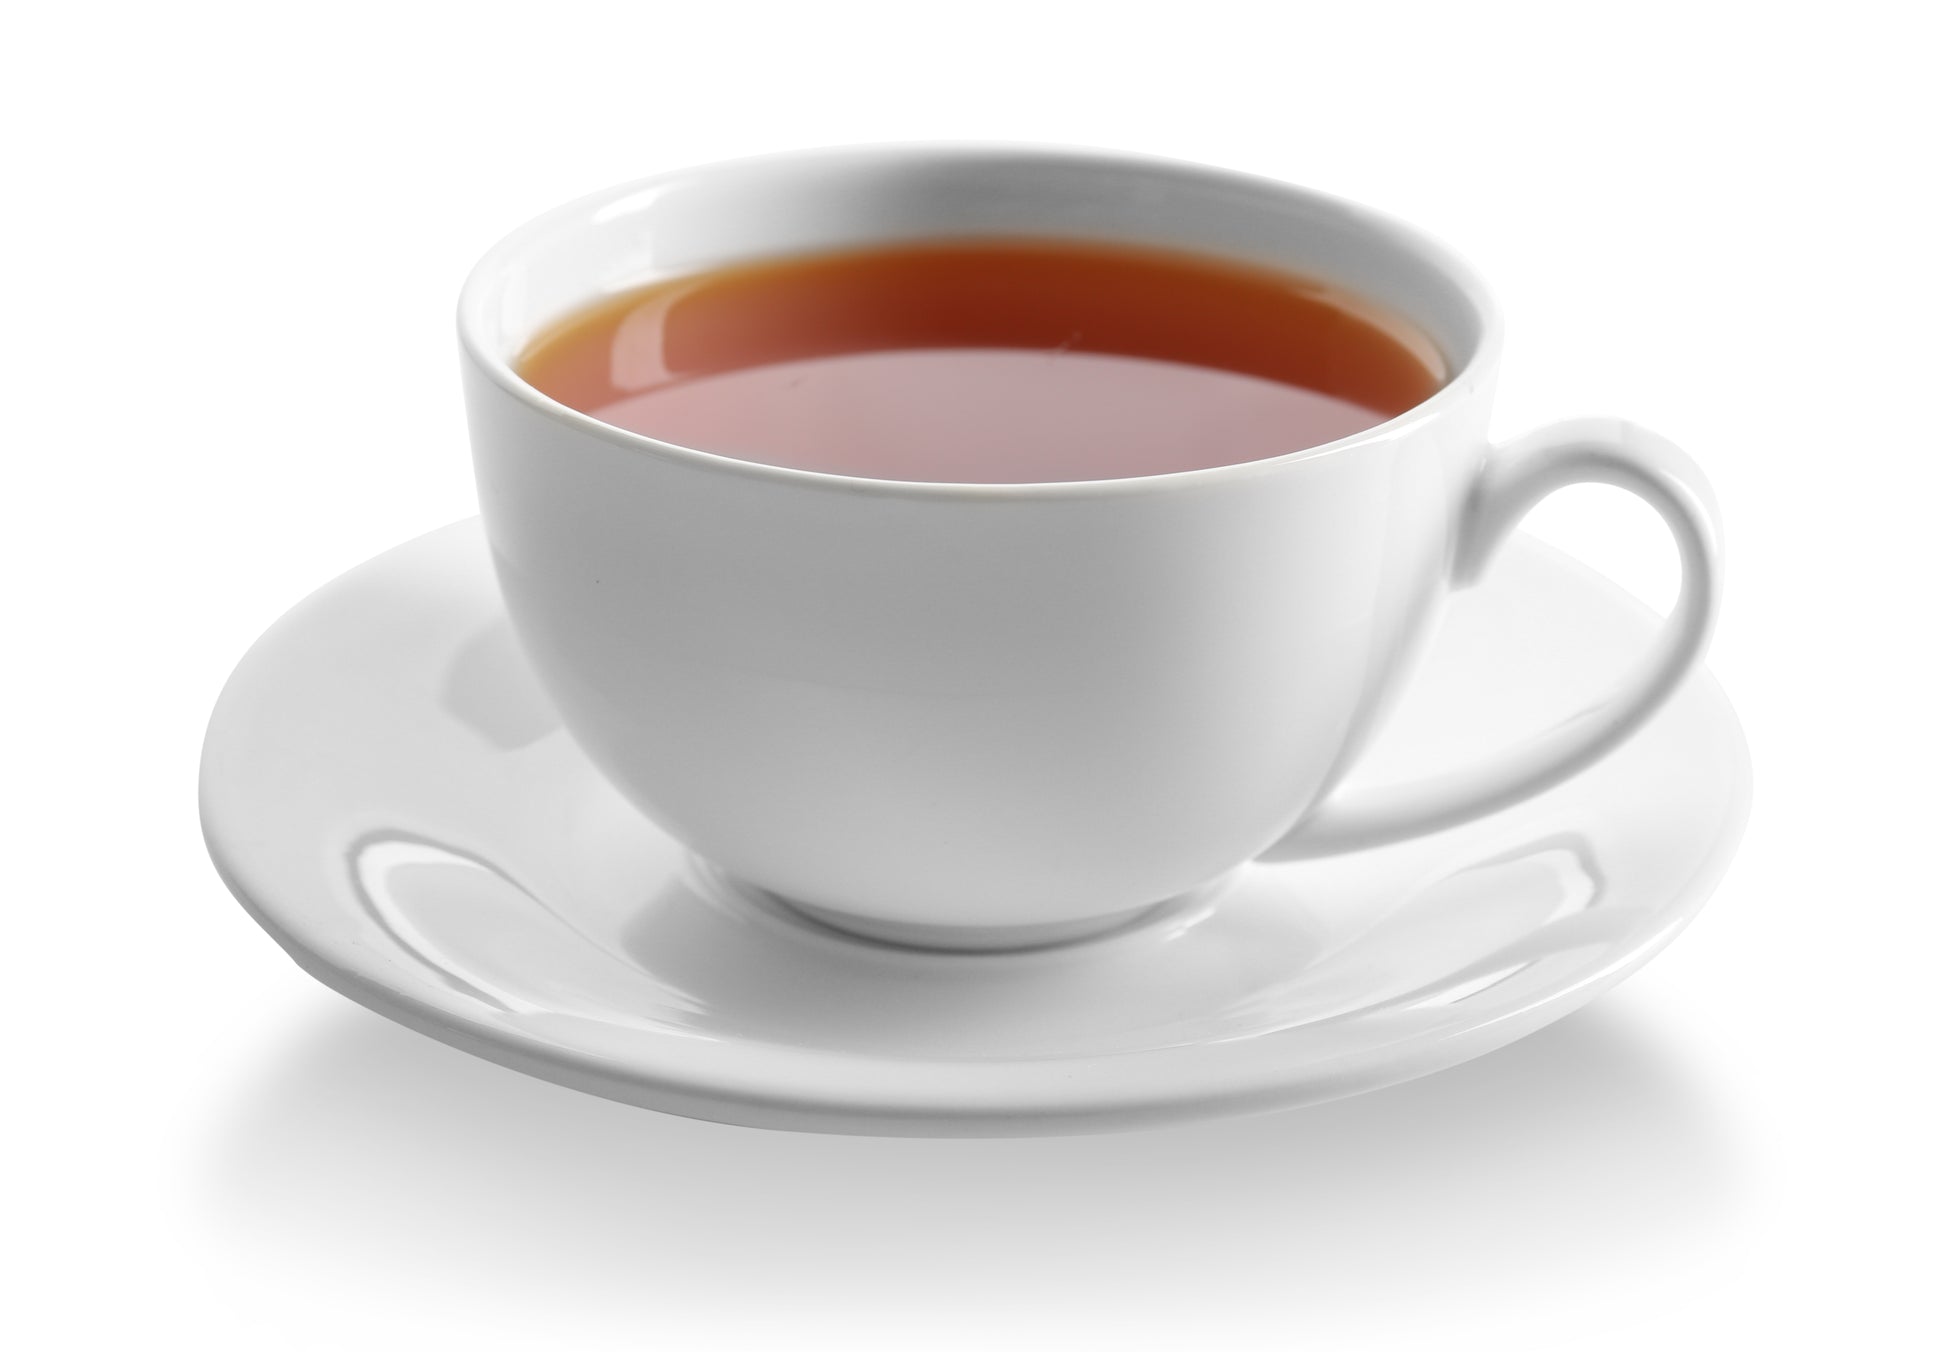 White cup of prostate care blend tea